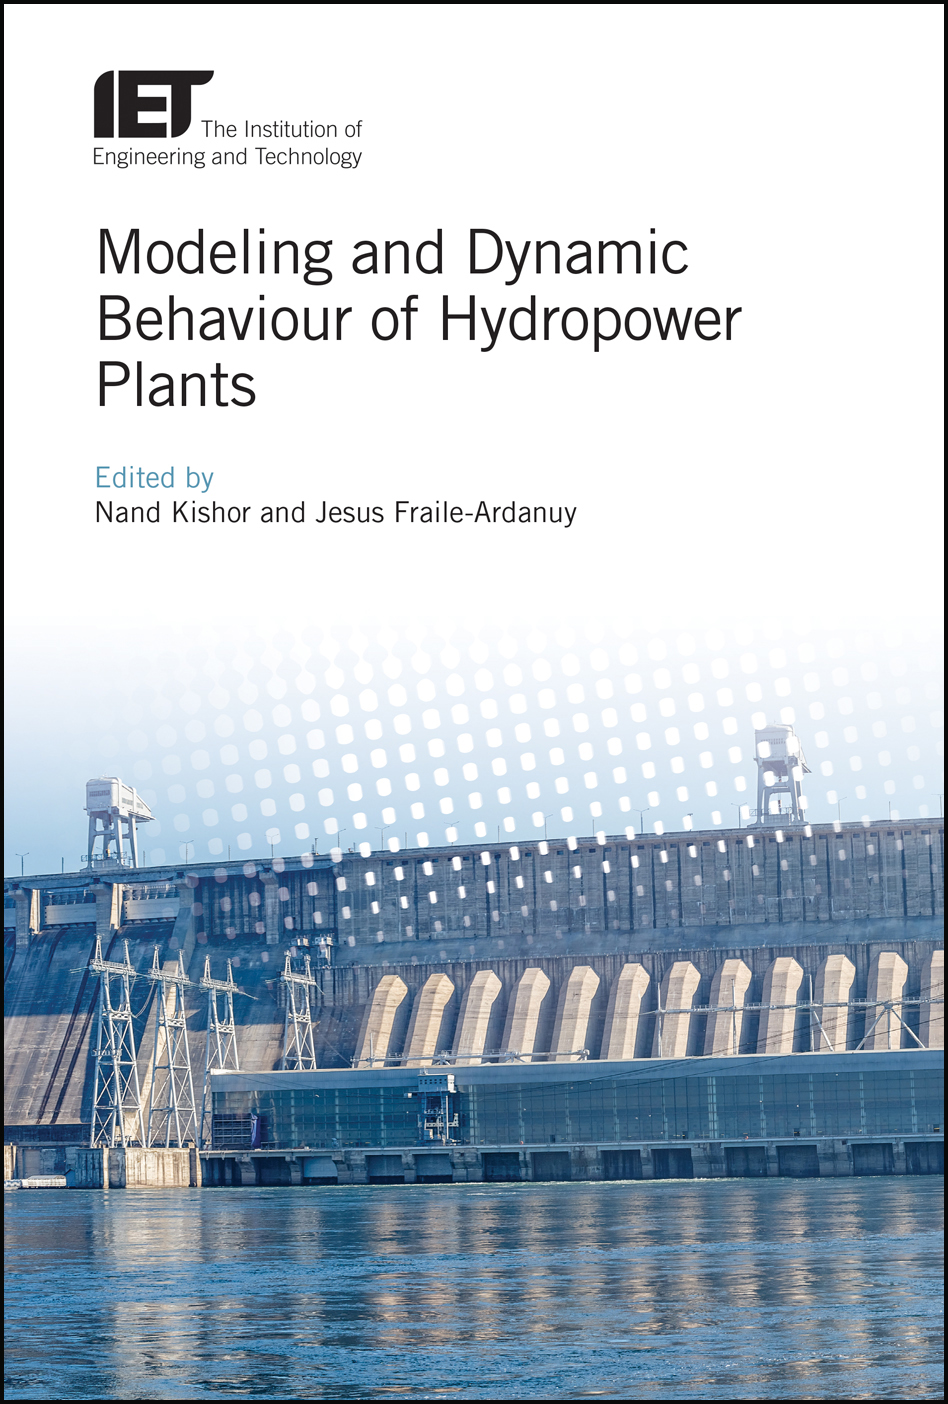 Modeling and Dynamic Behaviour of Hydropower Plants